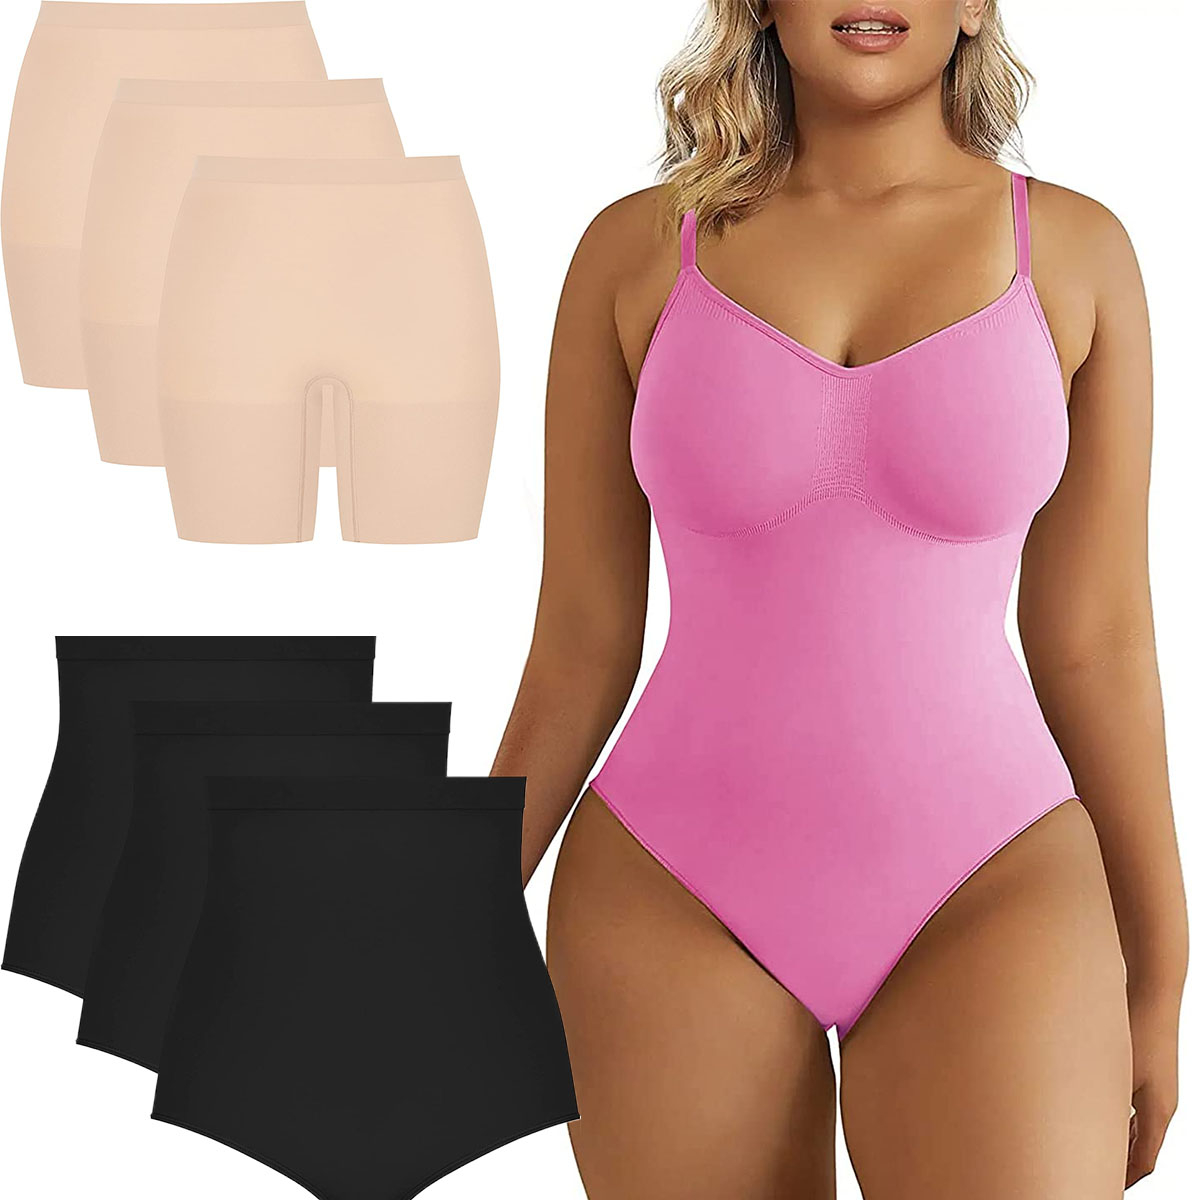 Top-Rated Shapewear To Help You Look and Feel Your Best